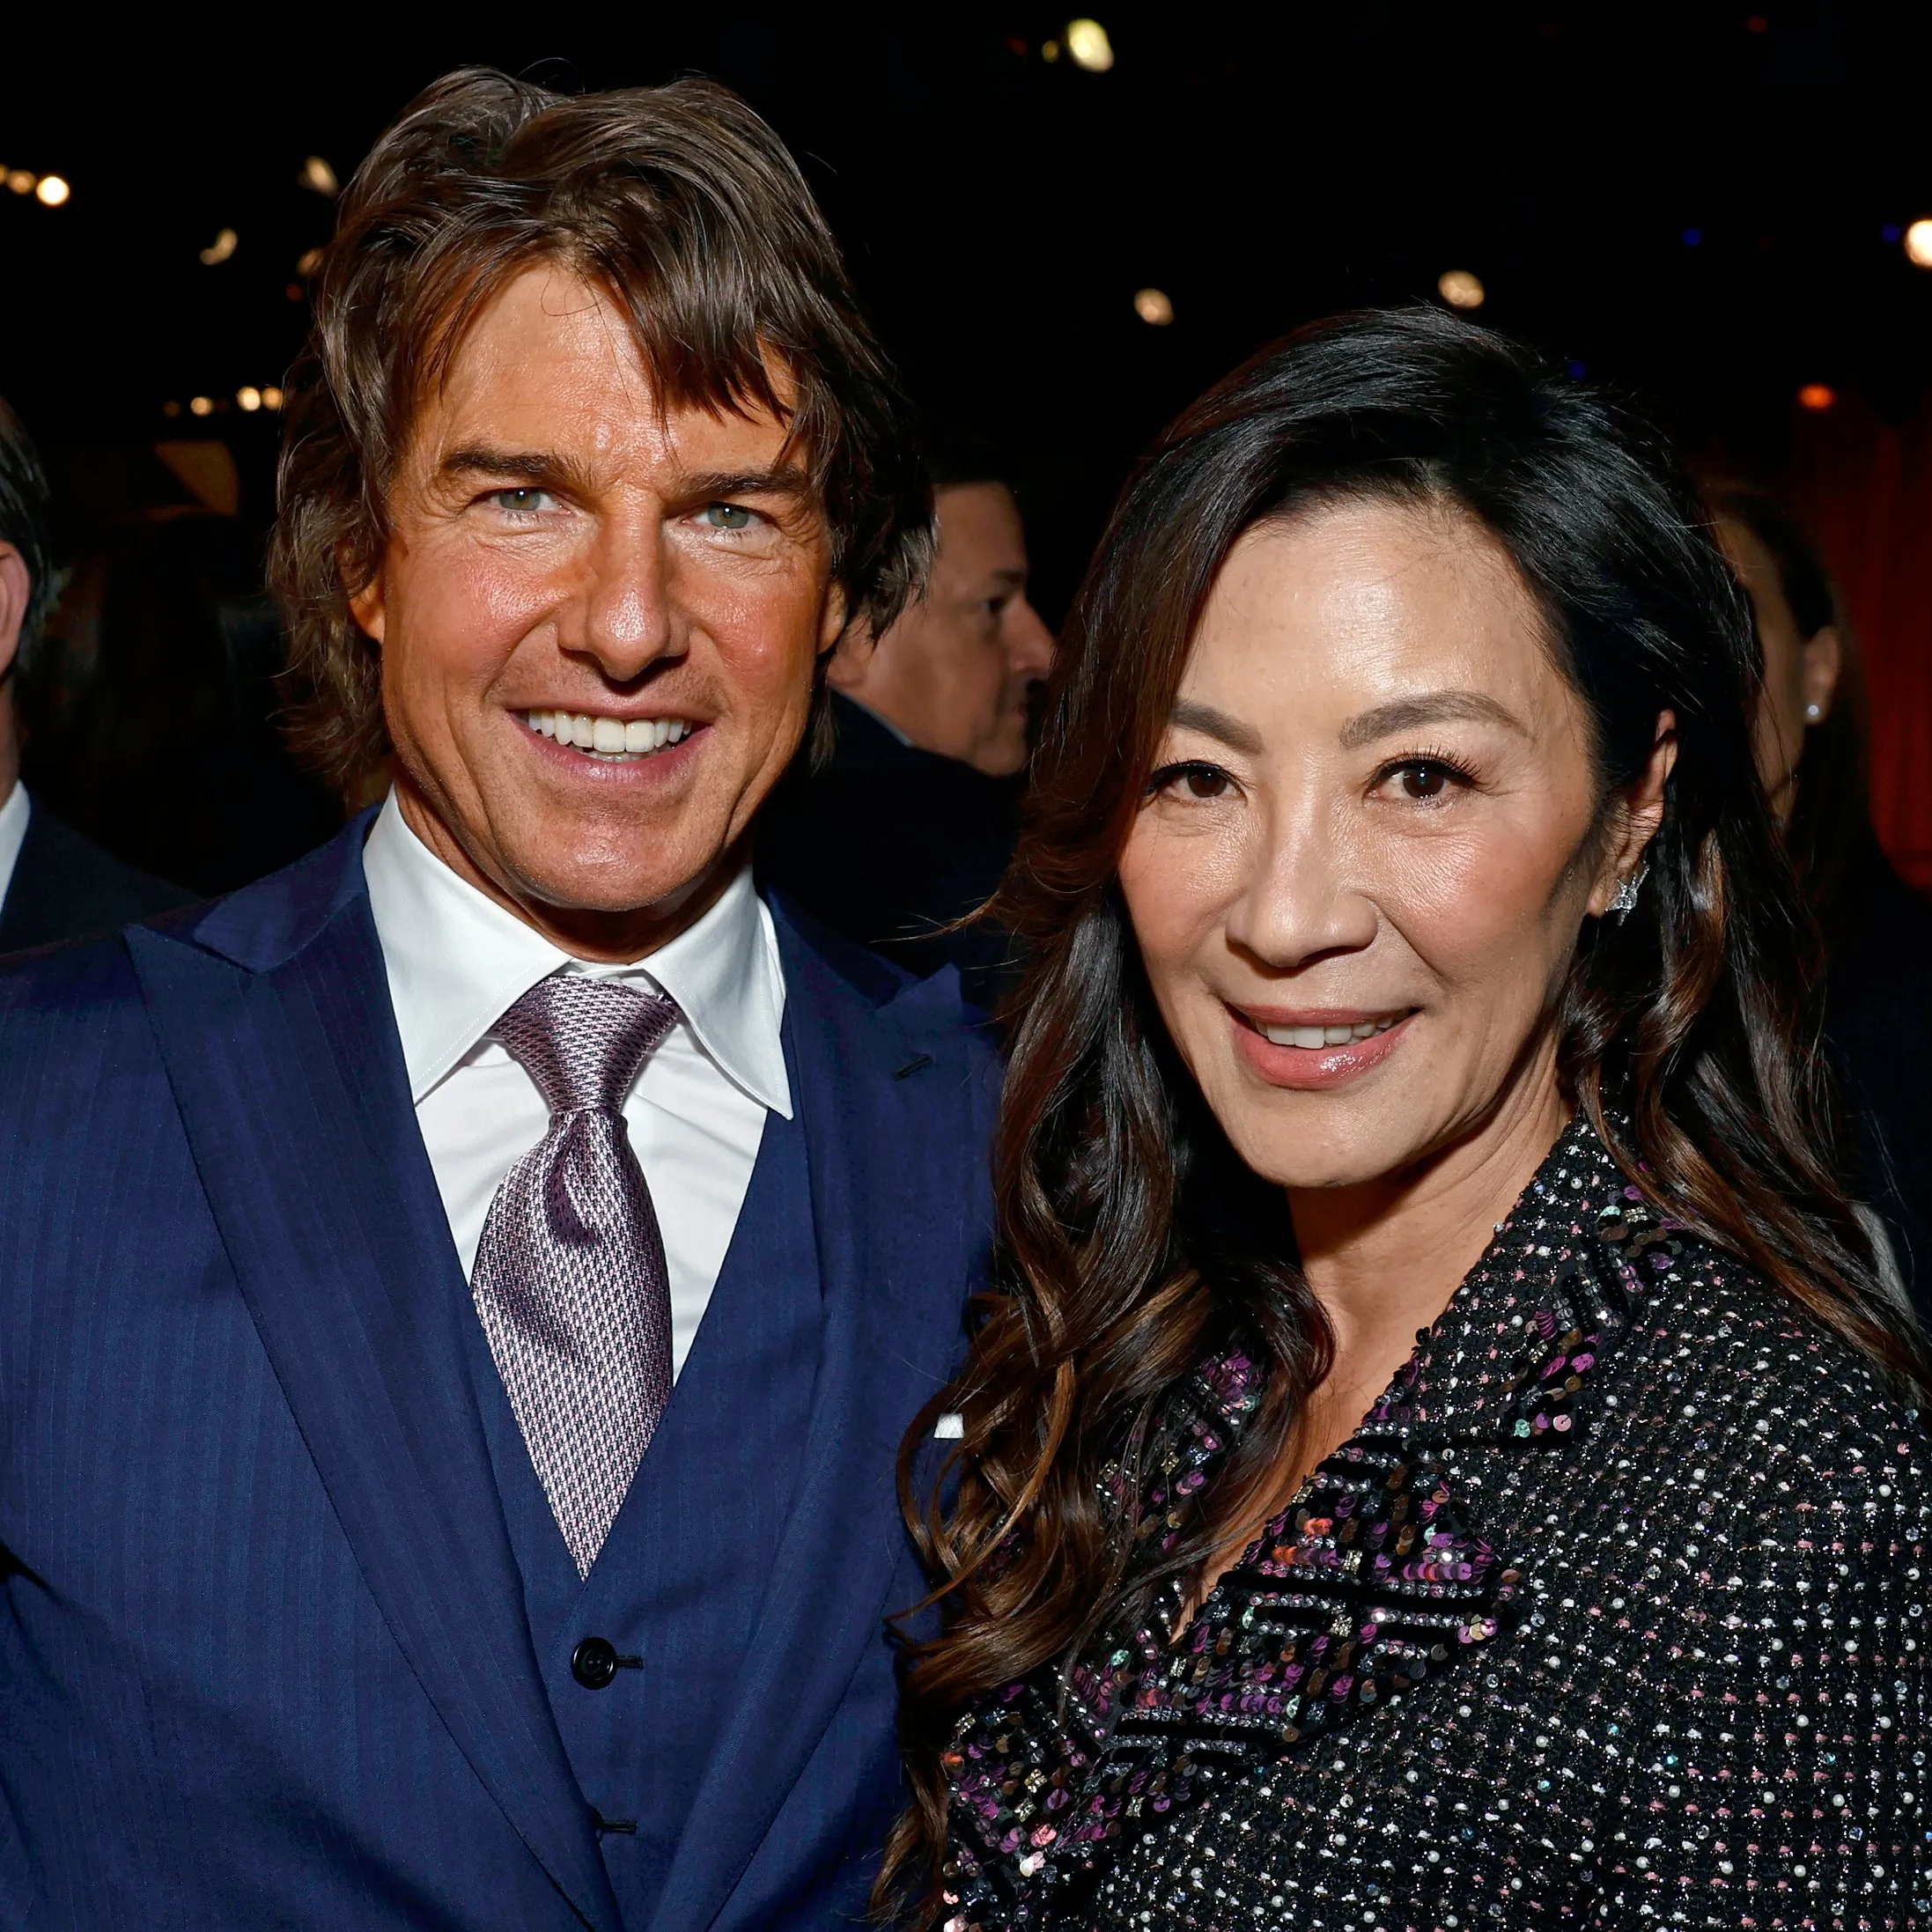 Tom Cruise in the spotlight at 2023 Oscar Nominees Luncheon | FMV6